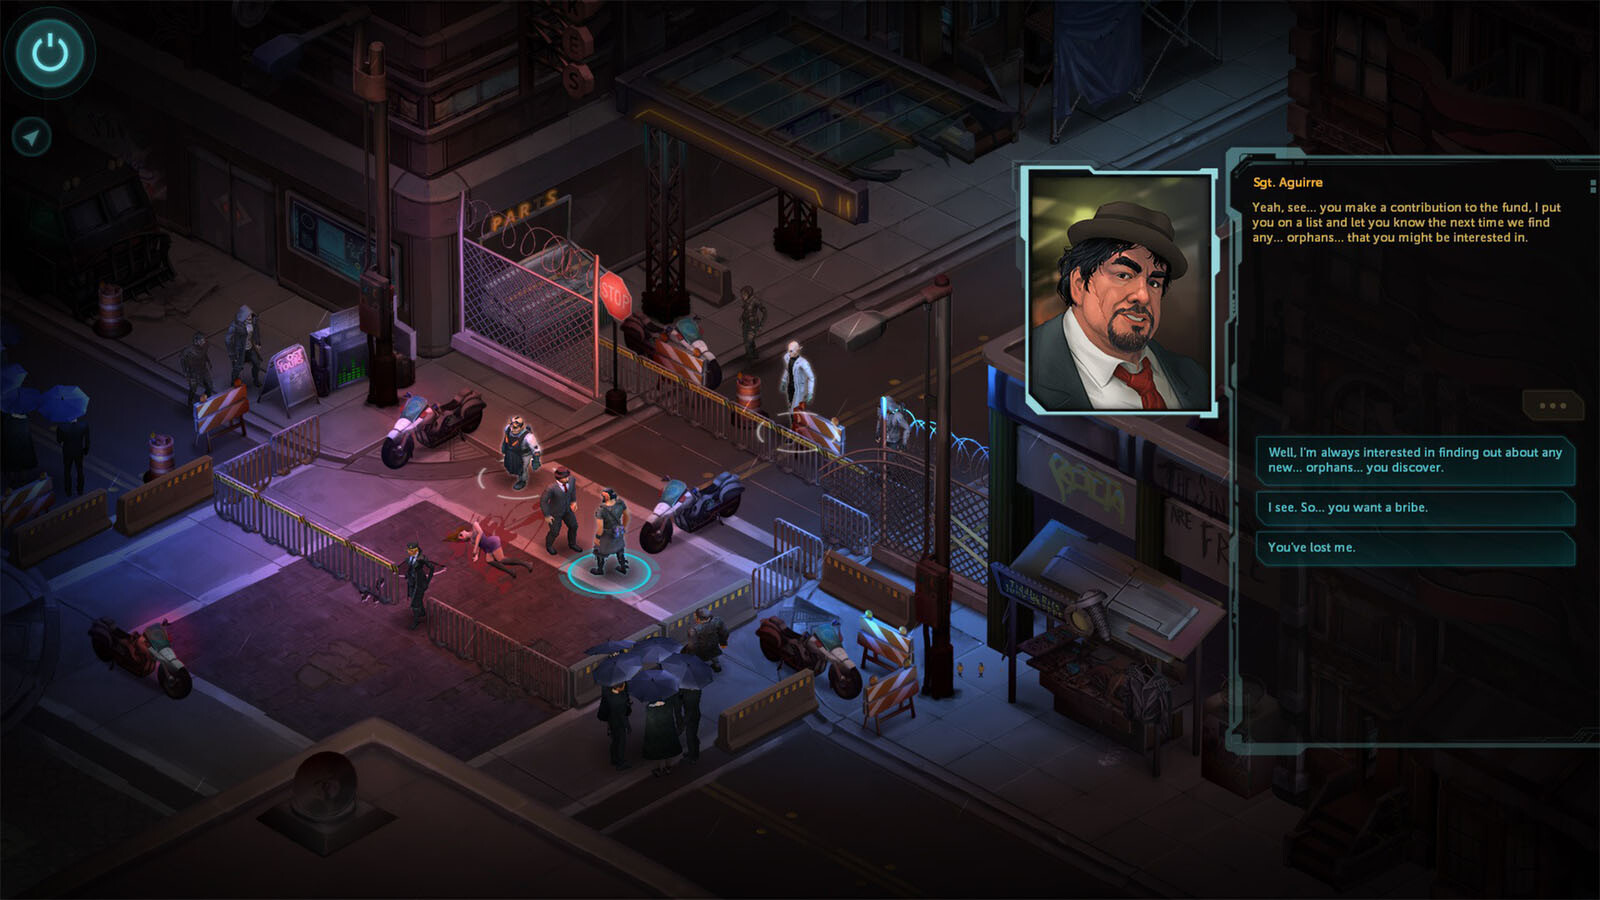 Shadowrun Trilogy Deluxe on Steam